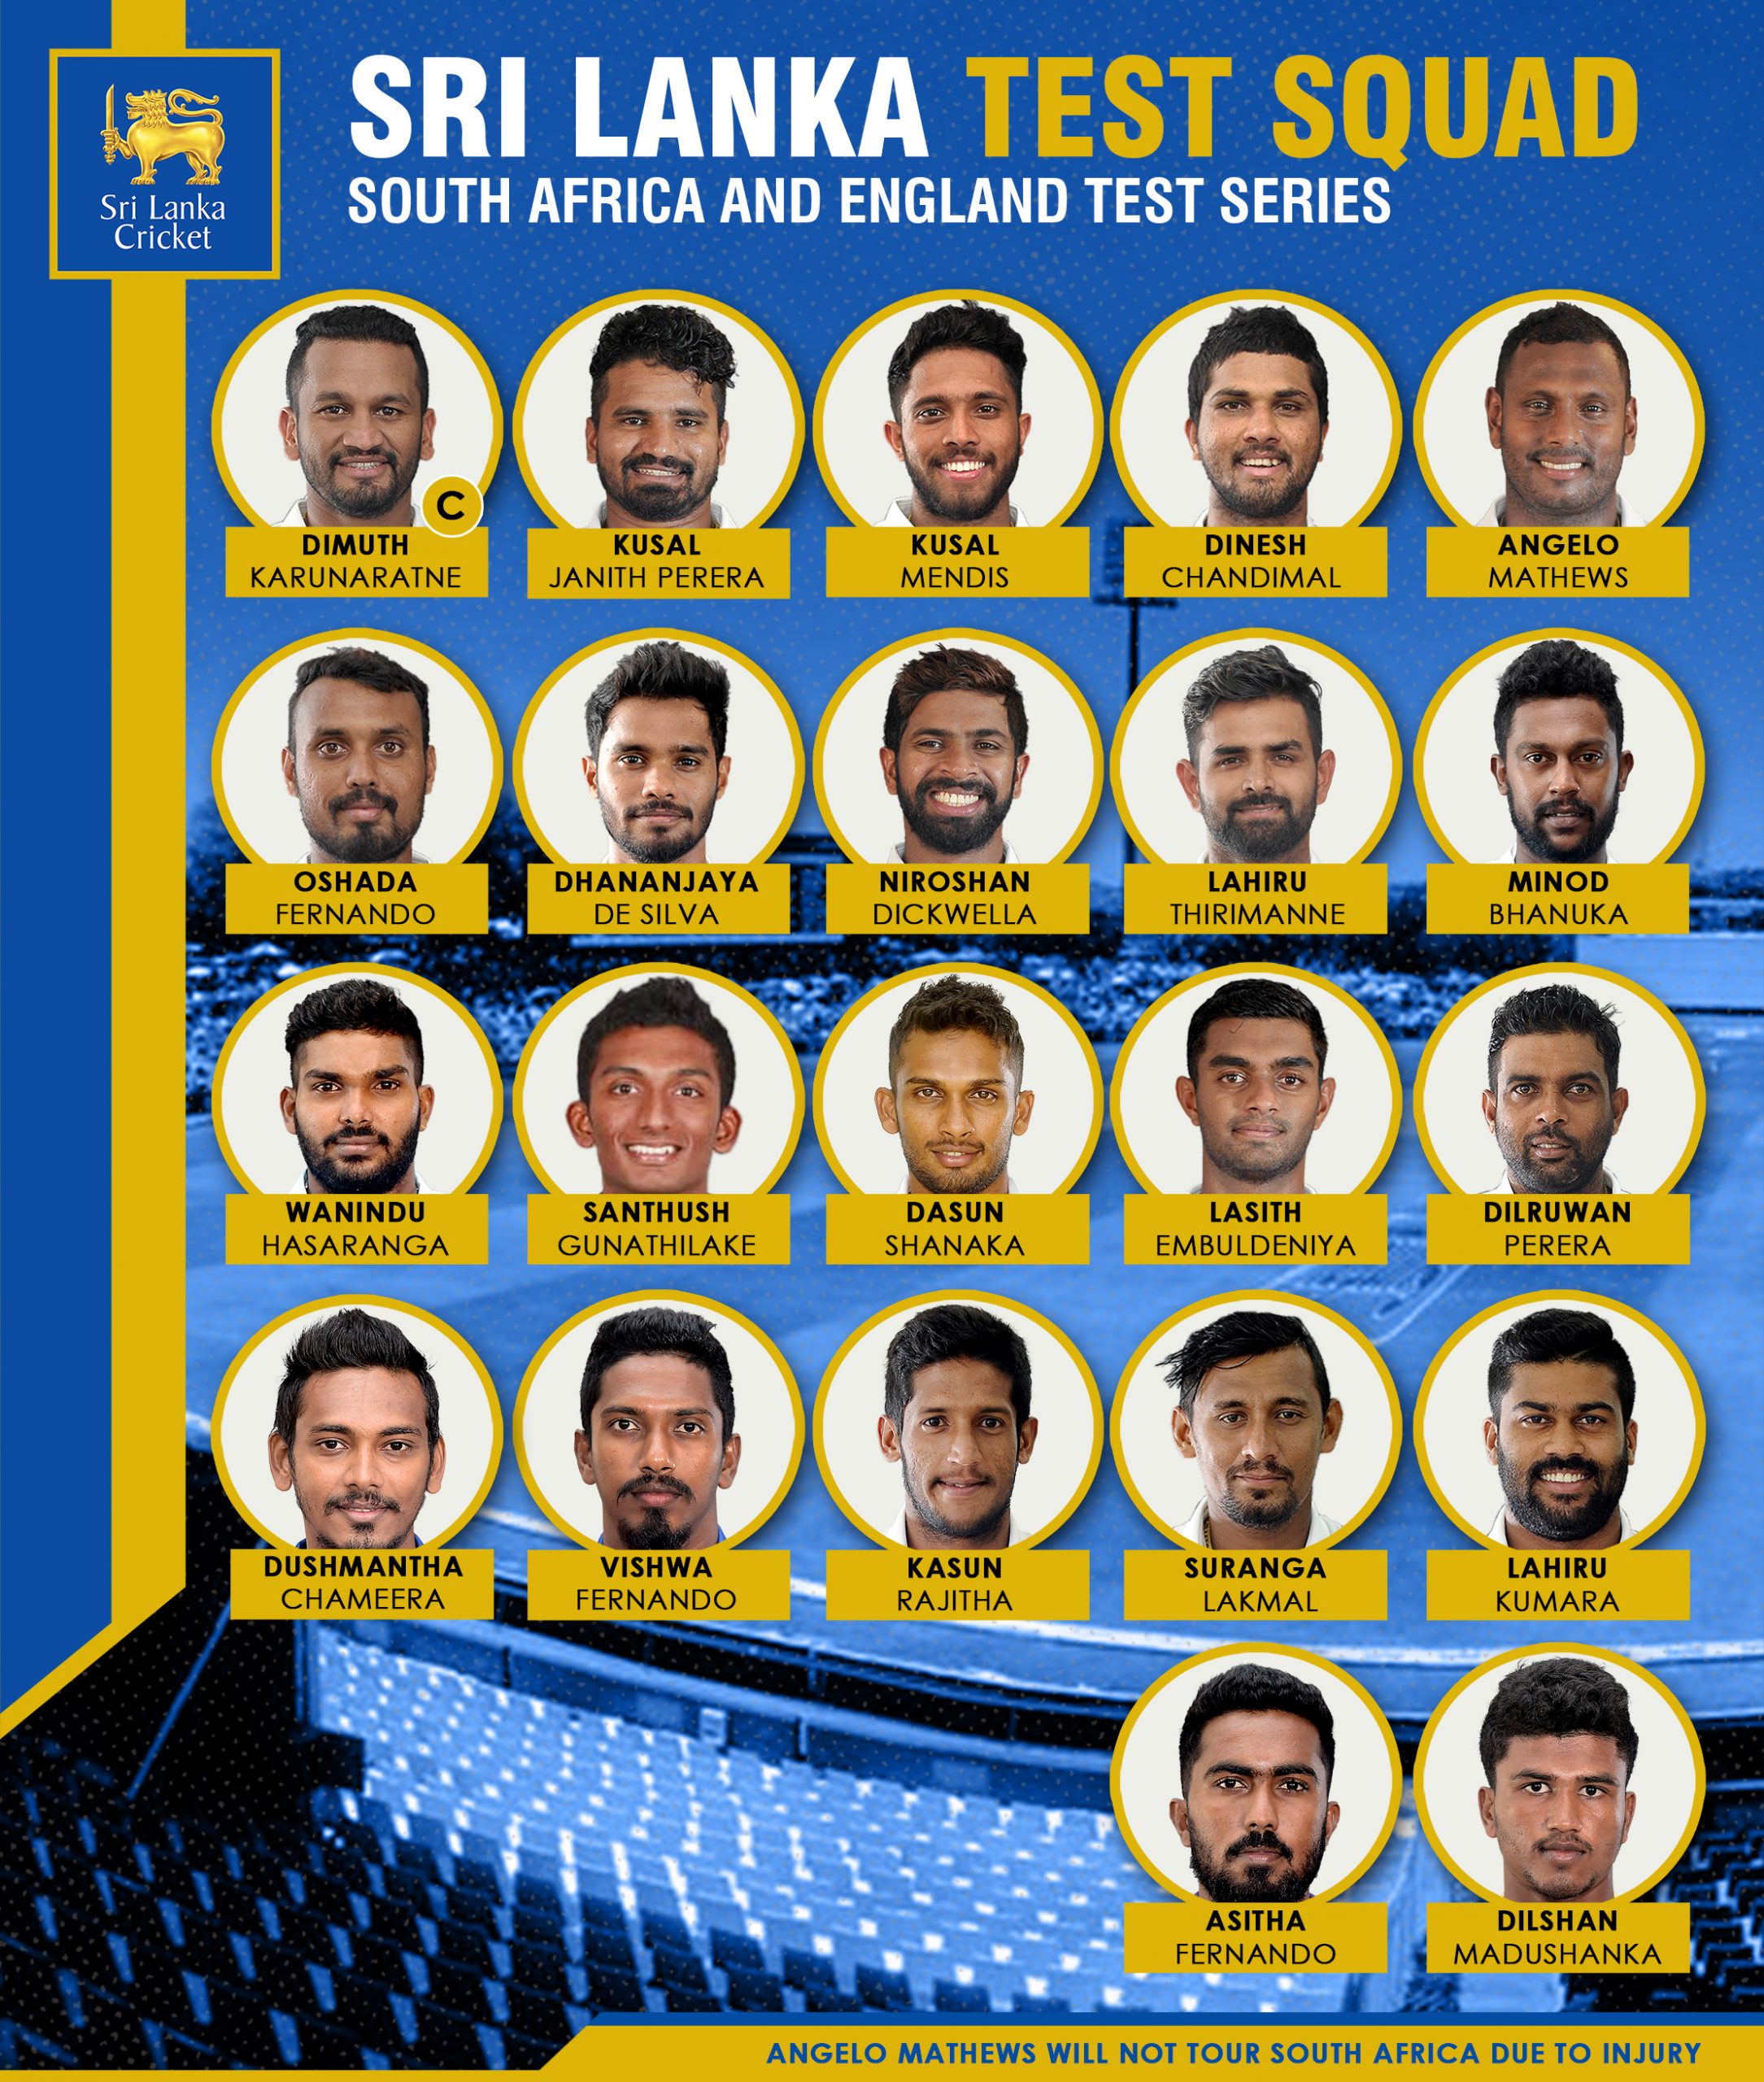 Sri Lanka Test Squad for South Africa and England Series